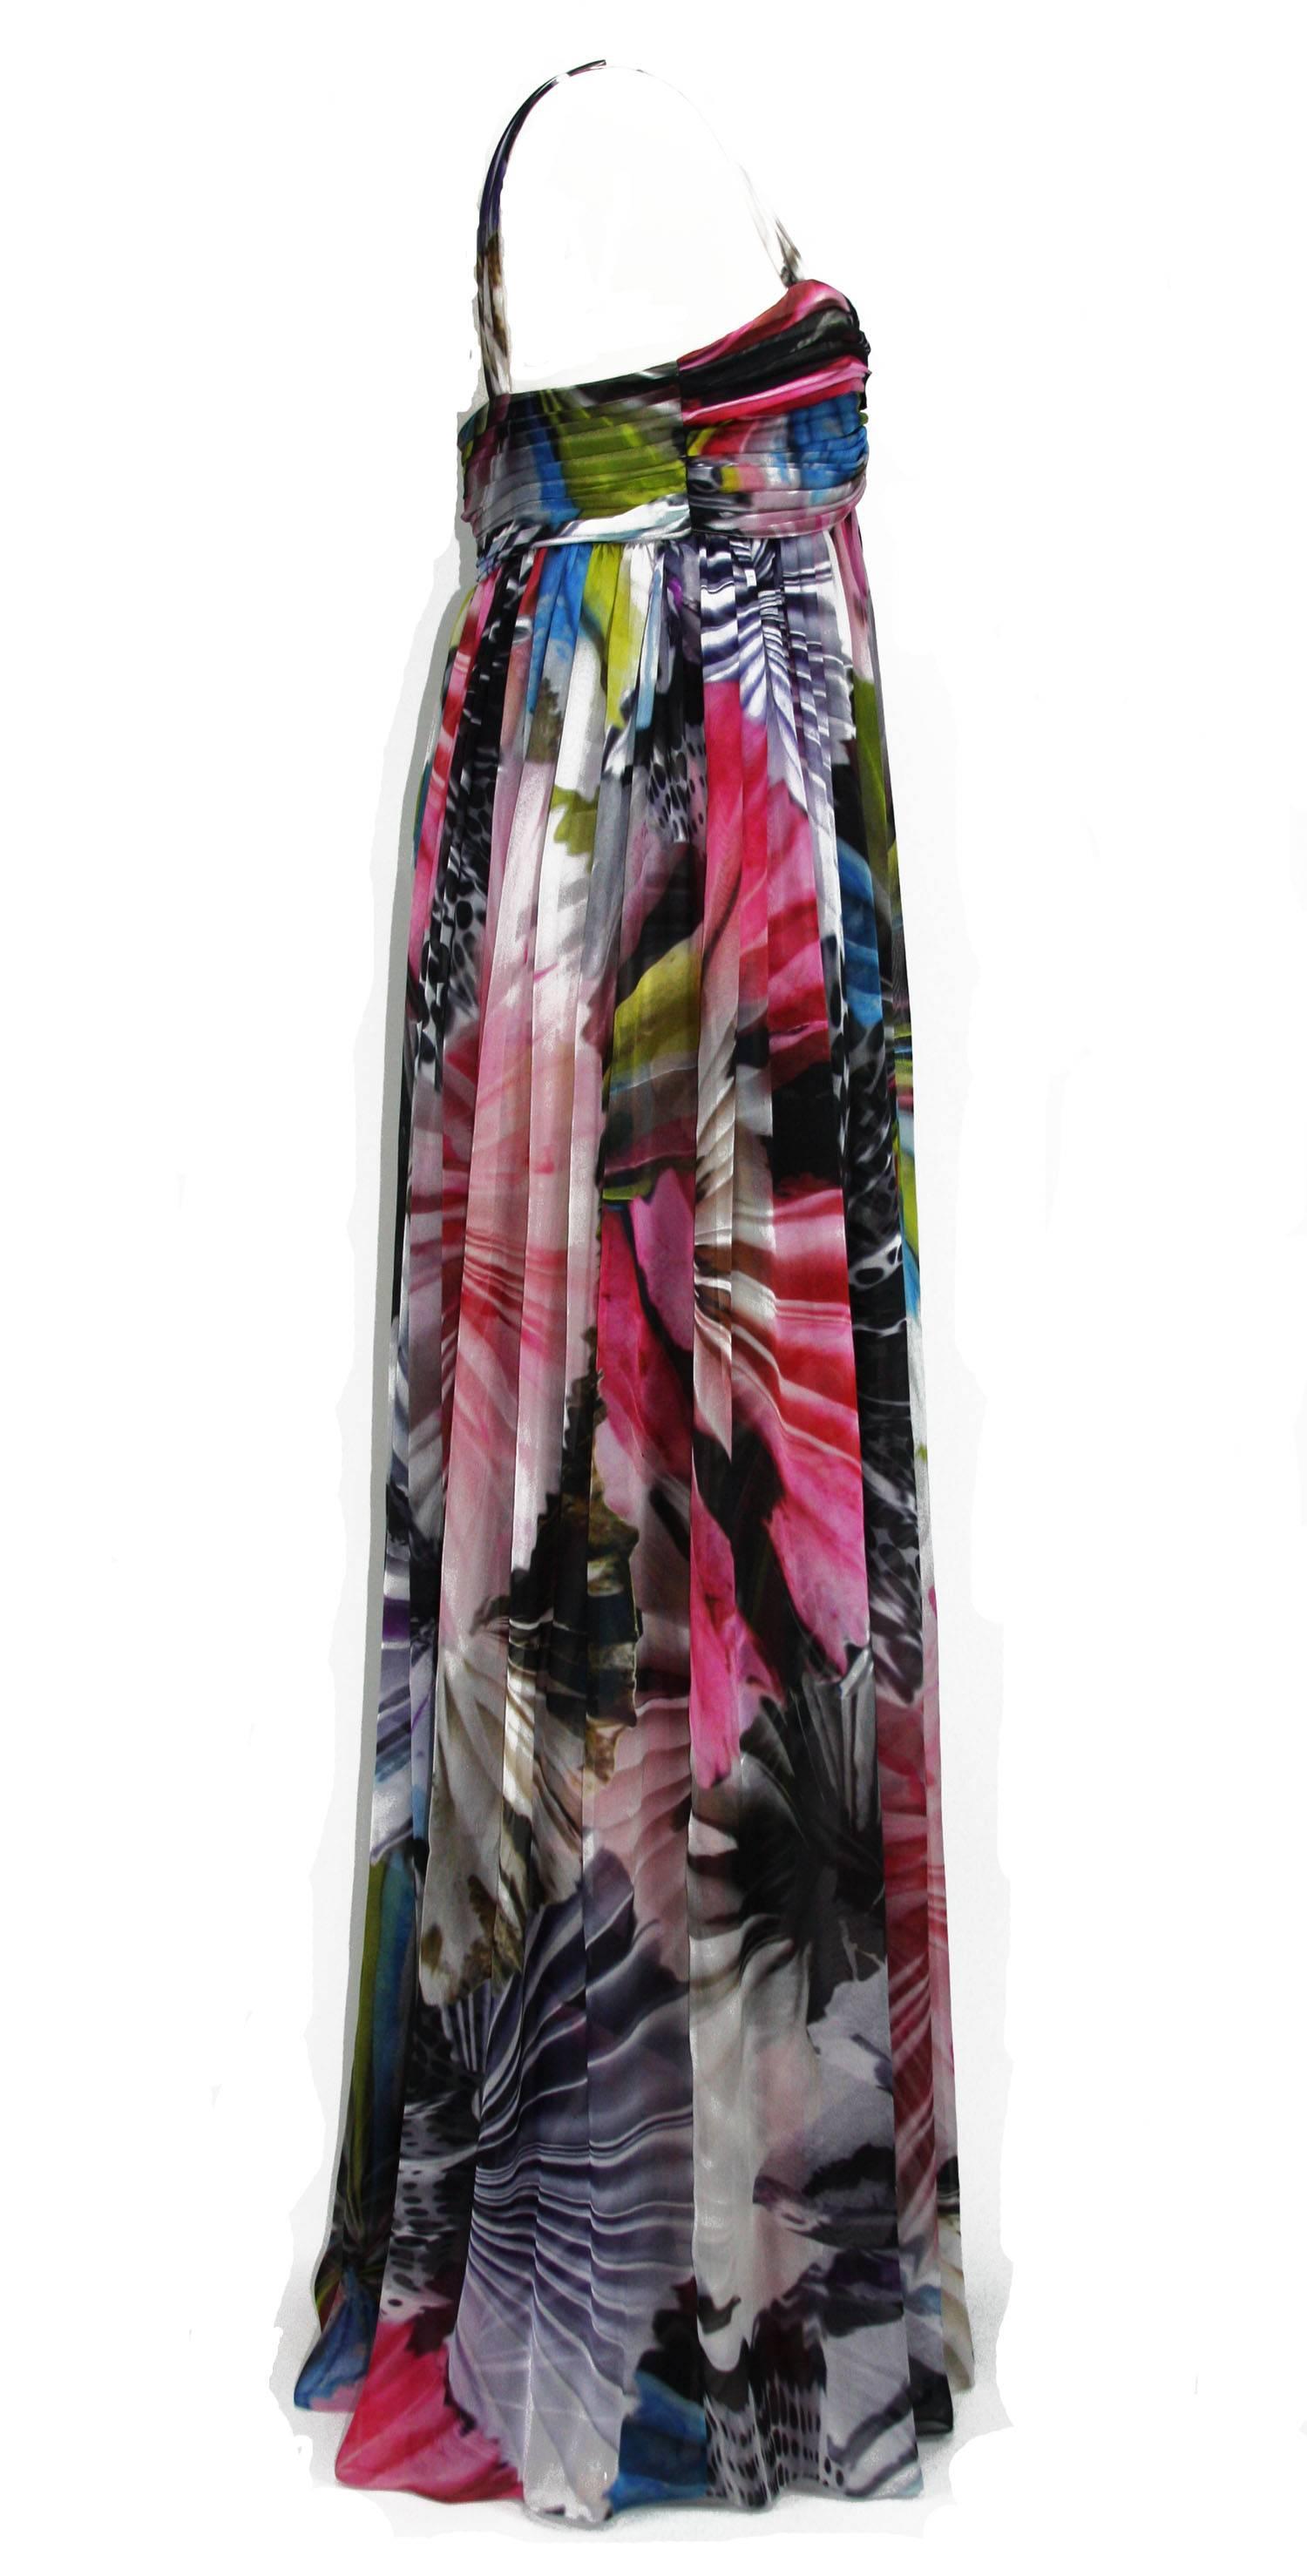 New MATTHEW WILLIAMSON Silk Long Dress Gown
US size 12
100% Silk
Colors – Multicolored
Double-Layered Printed Silk
Fully Lined– 100% Silk
Side Hidden Zip Closure
Brand New with tag.